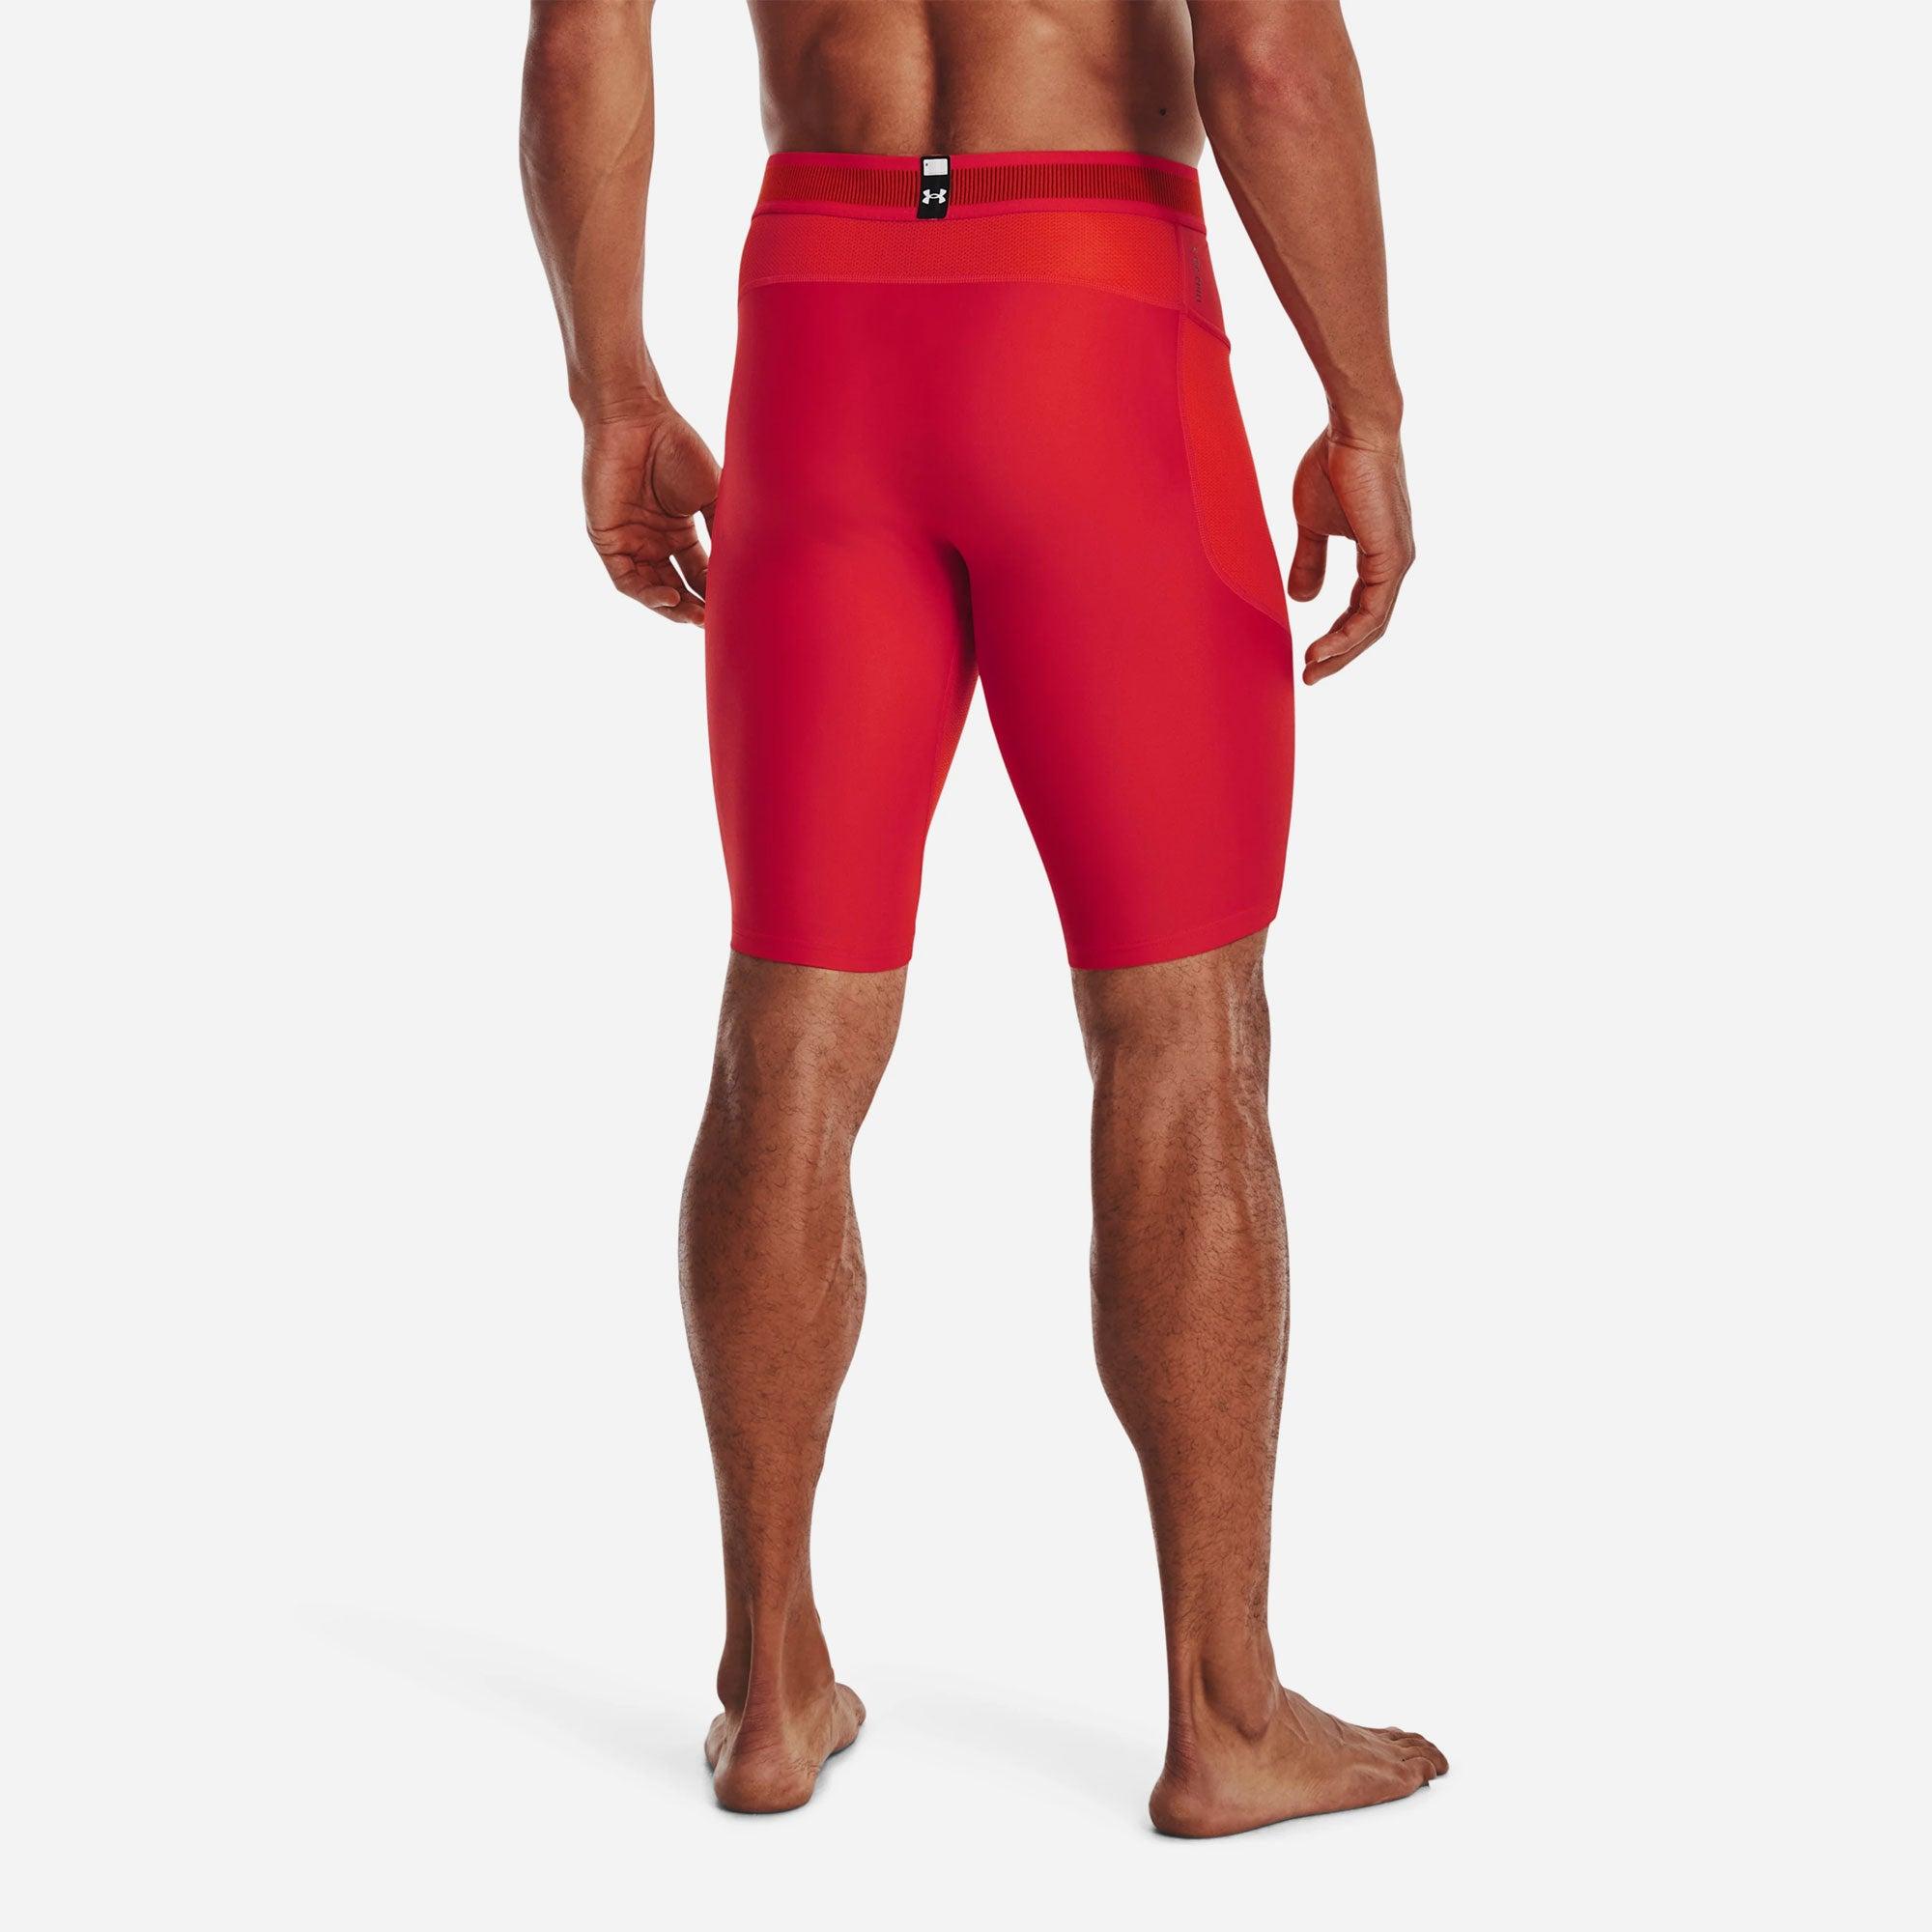 Quần ngắn thể thao nam Under Armour Isochill - 1365224-890